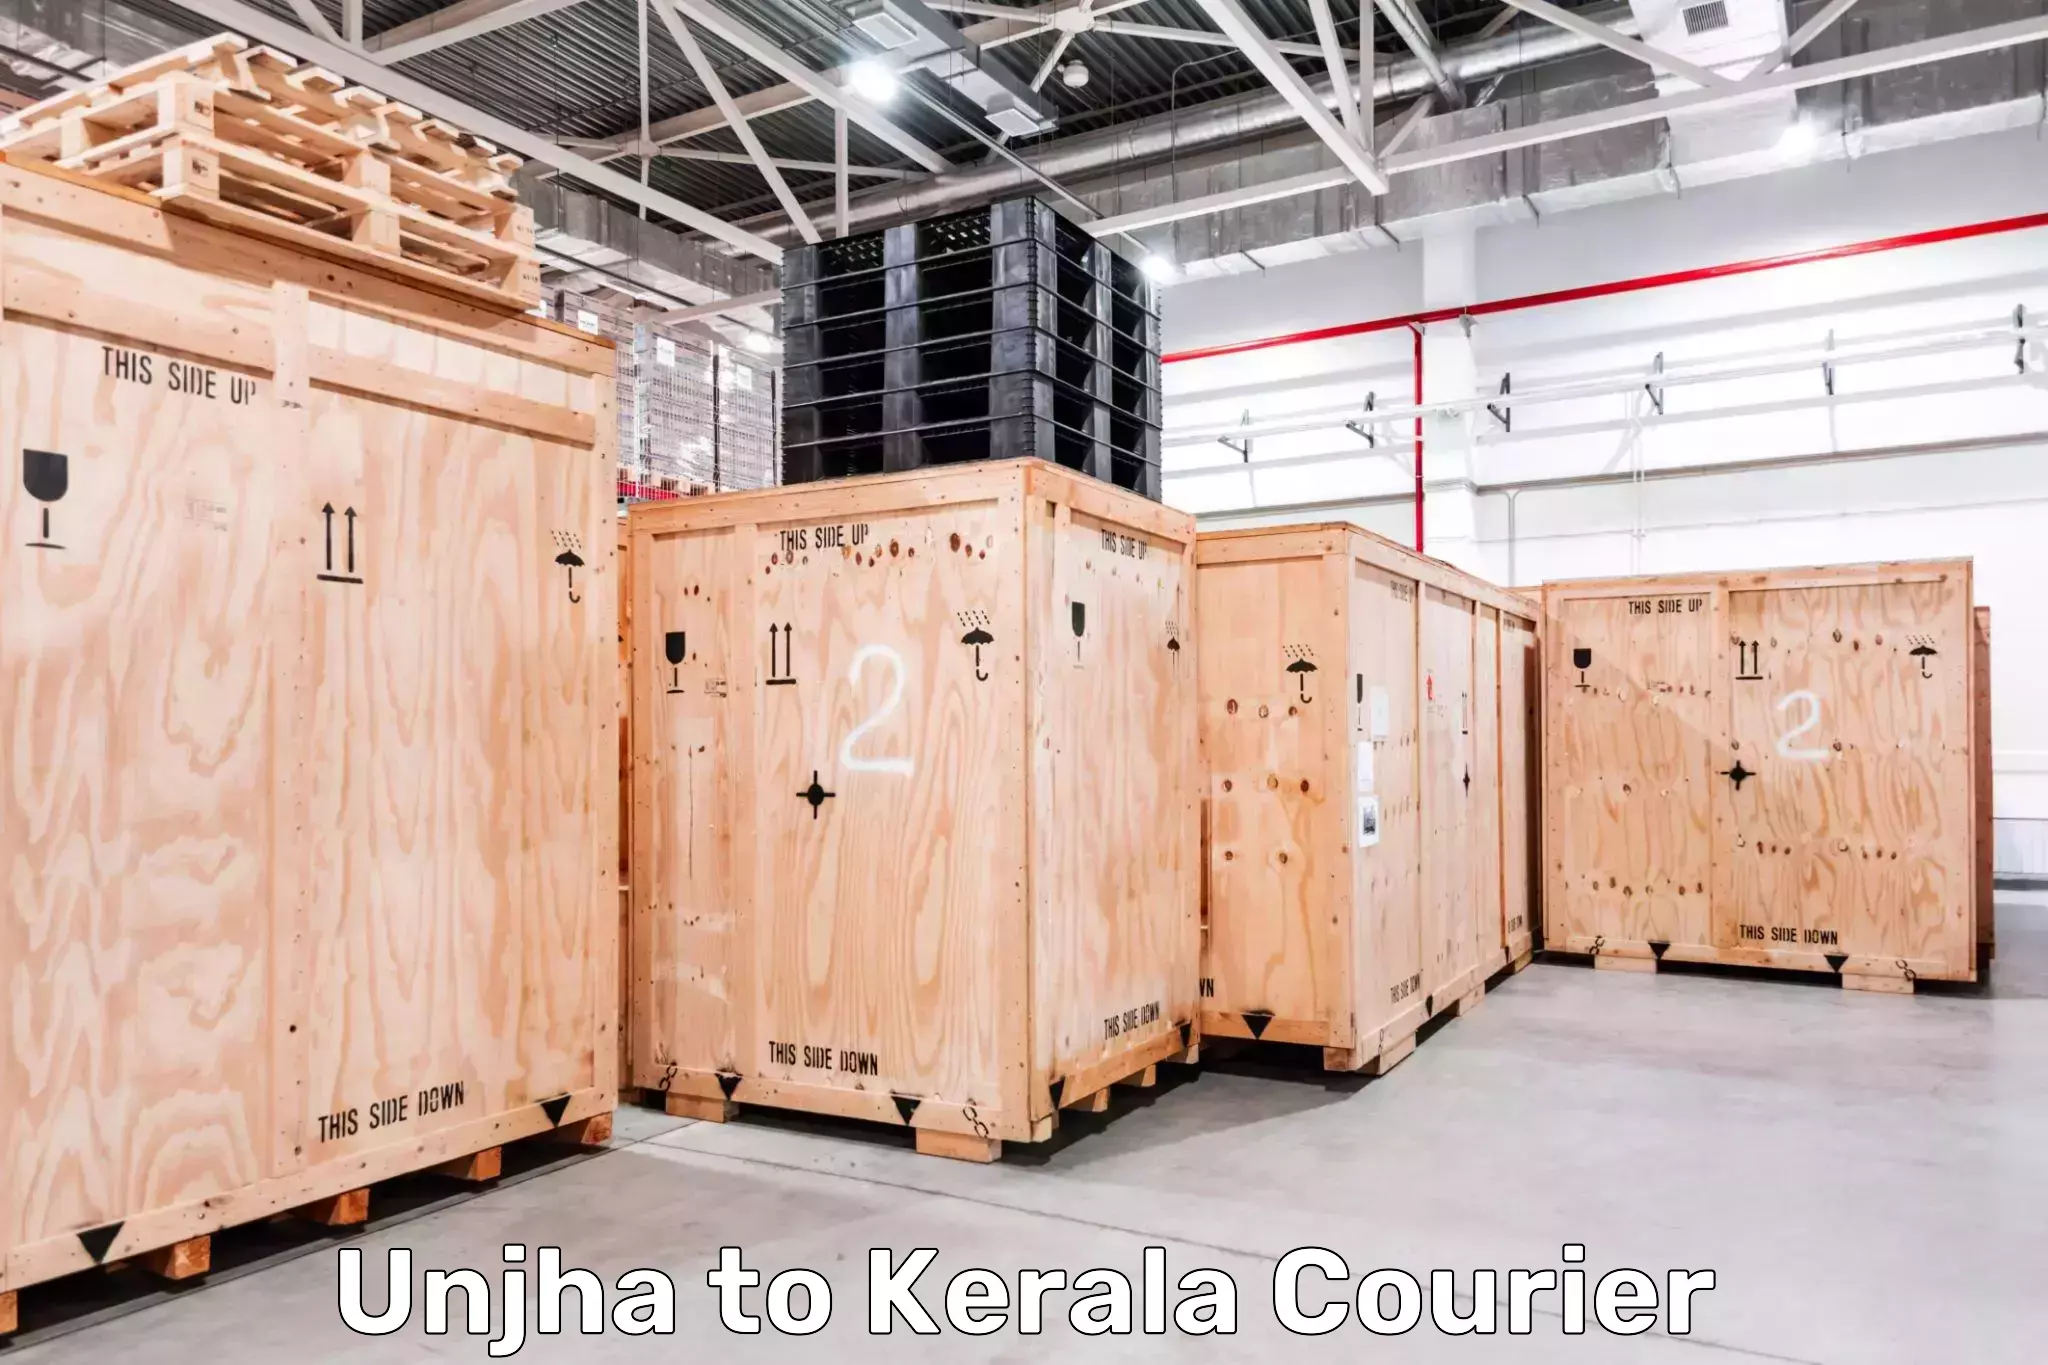 On-call courier service Unjha to Kerala